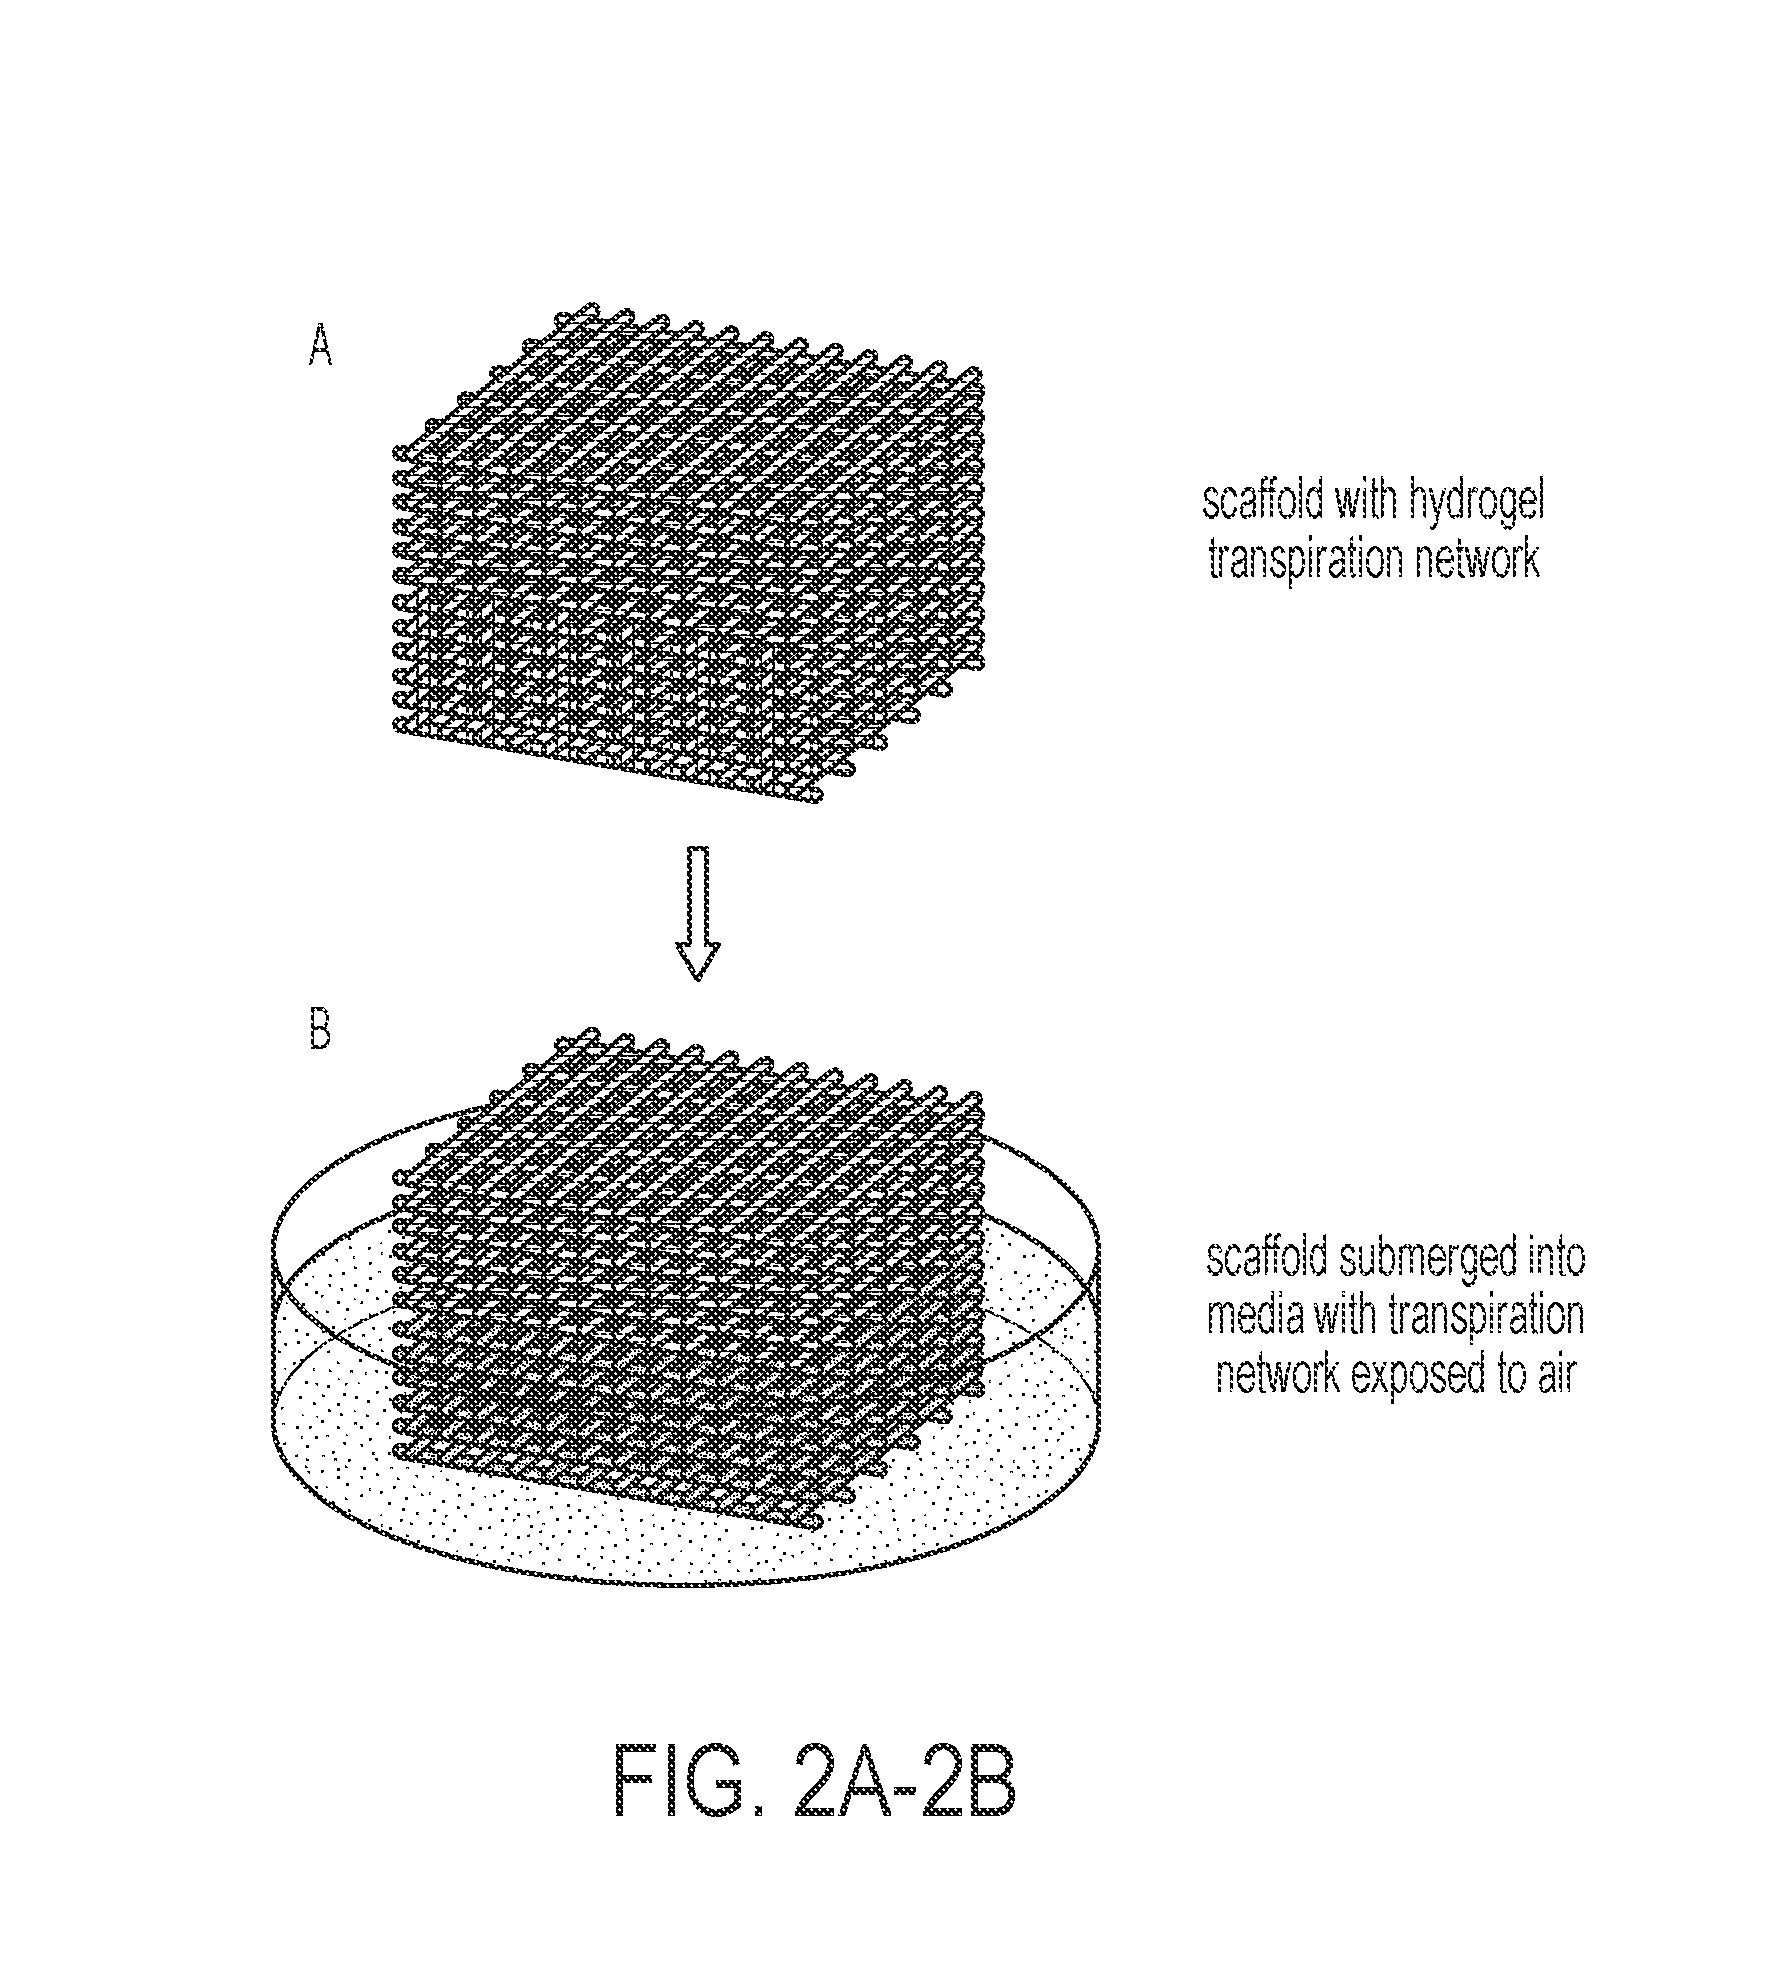 Method for creating an internal transport system within tissue scaffolds using computer-aided tissue engineering